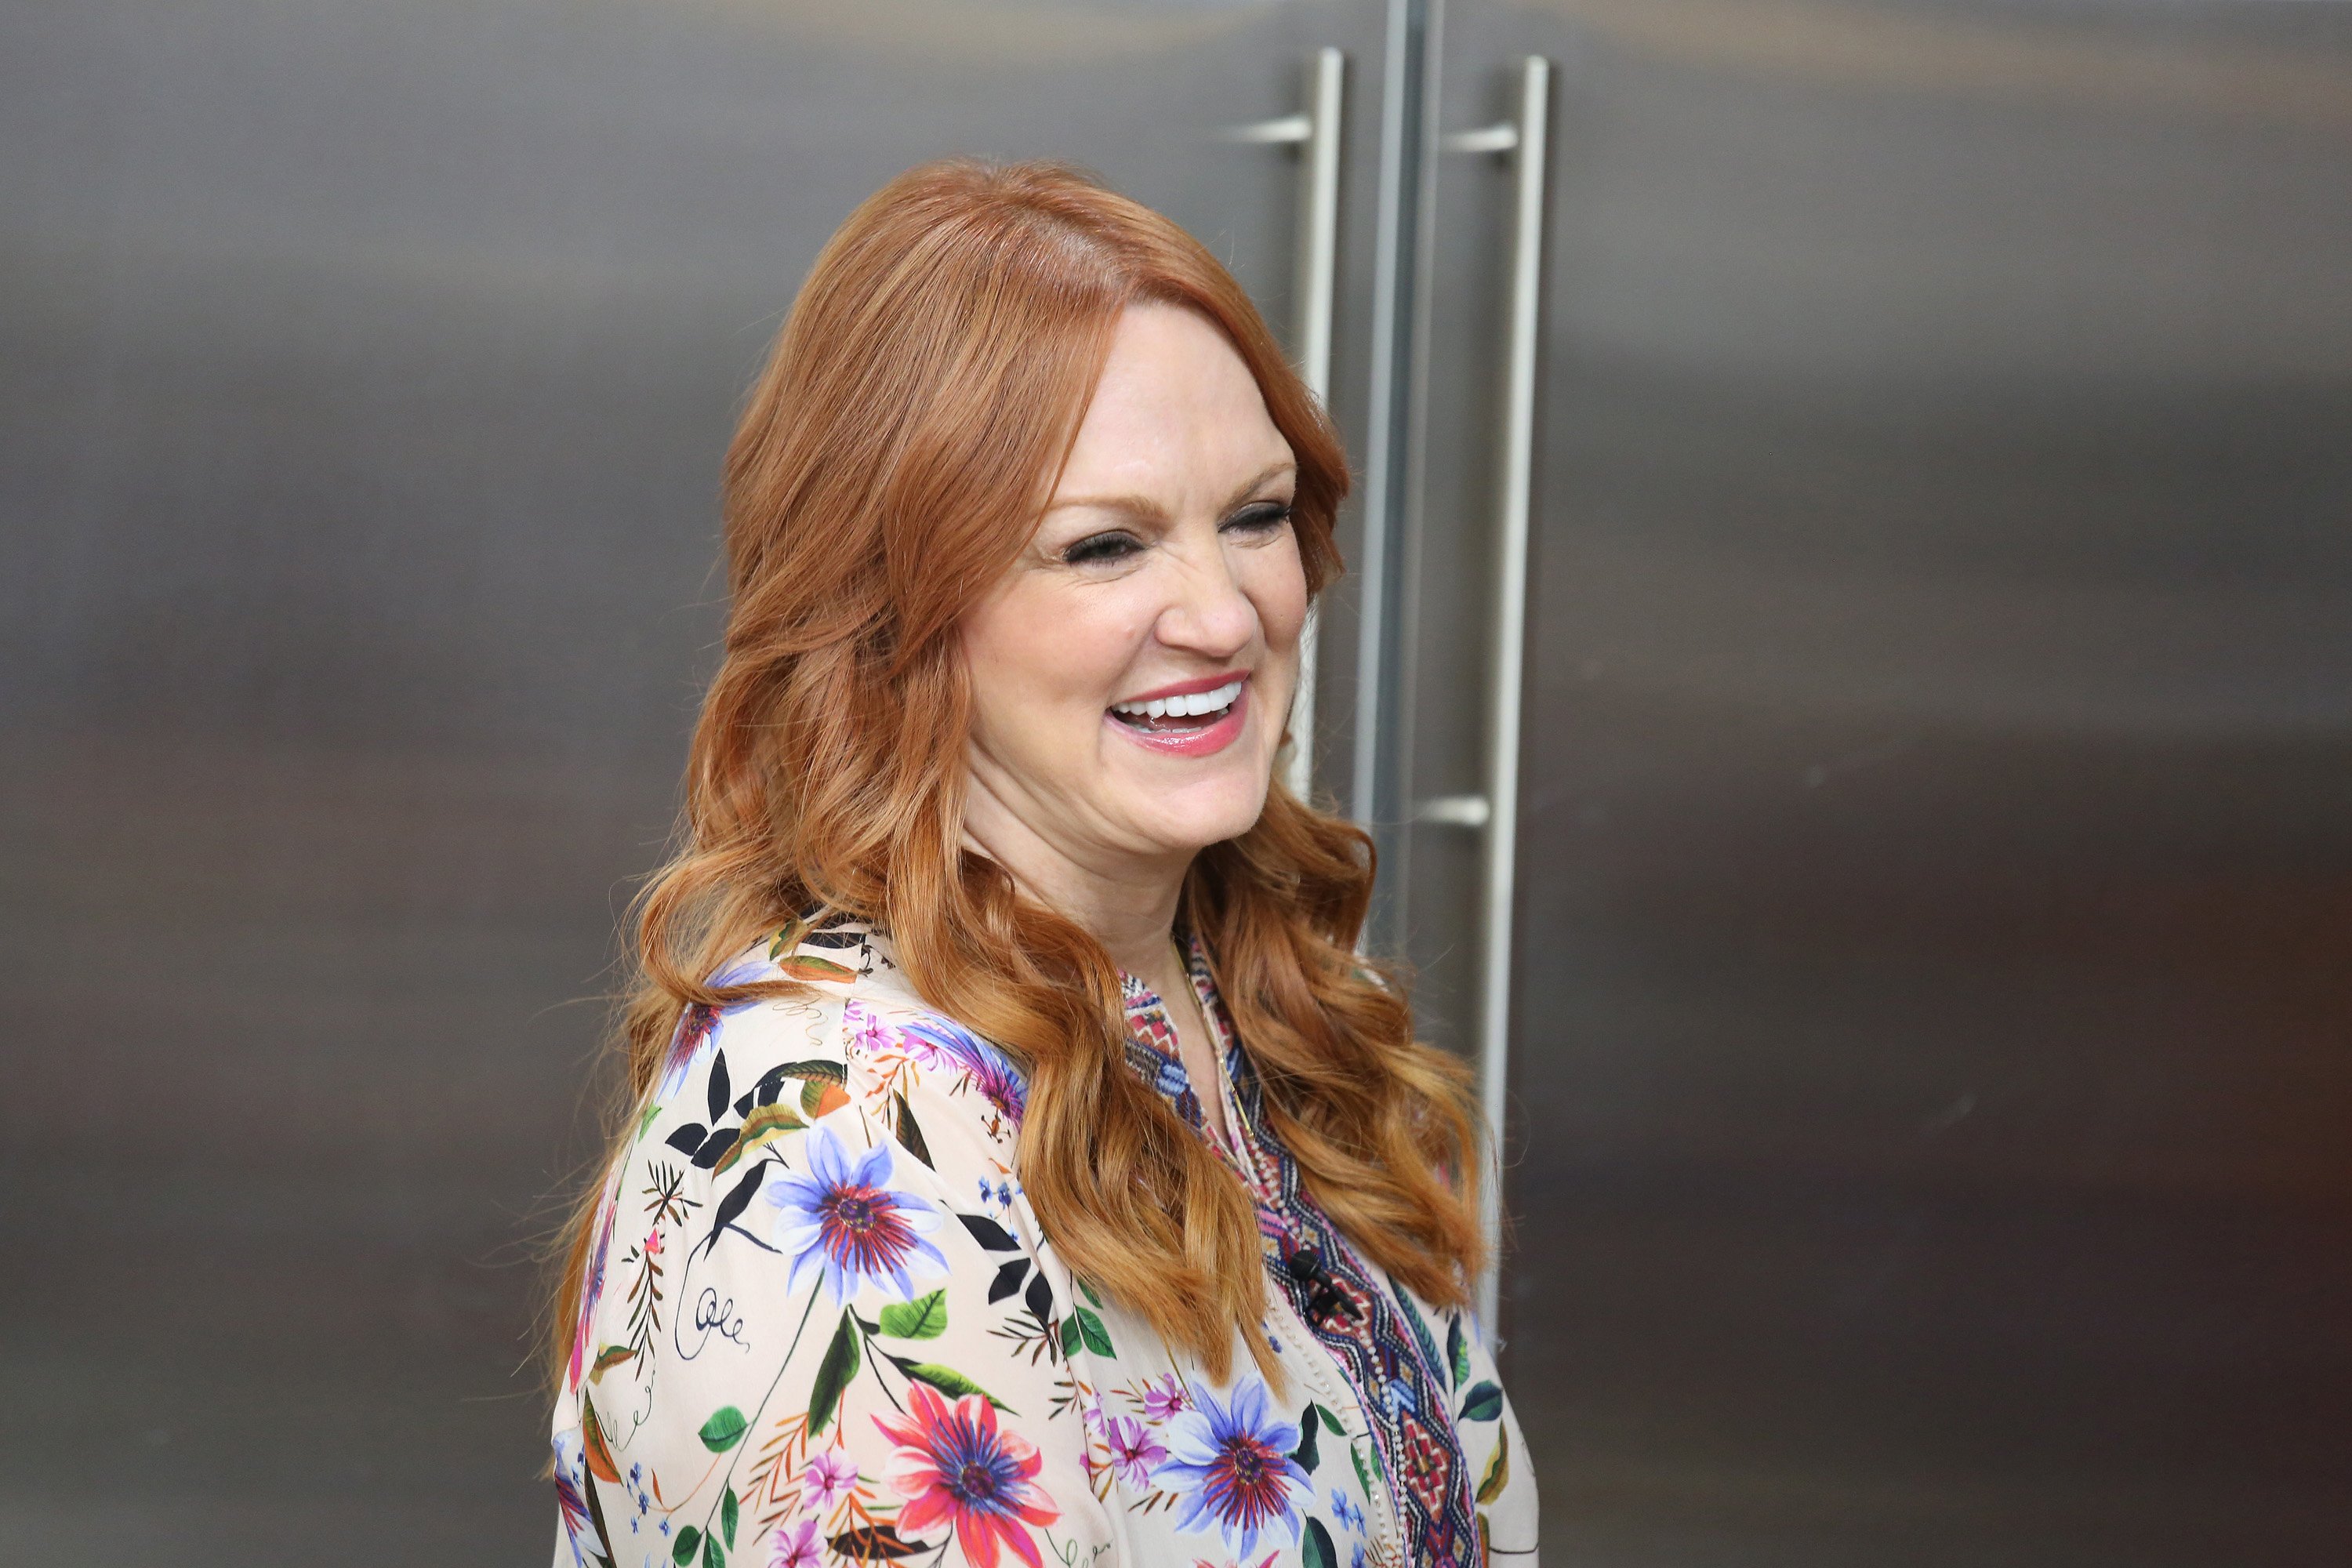 Ree Drummond on the Today show.